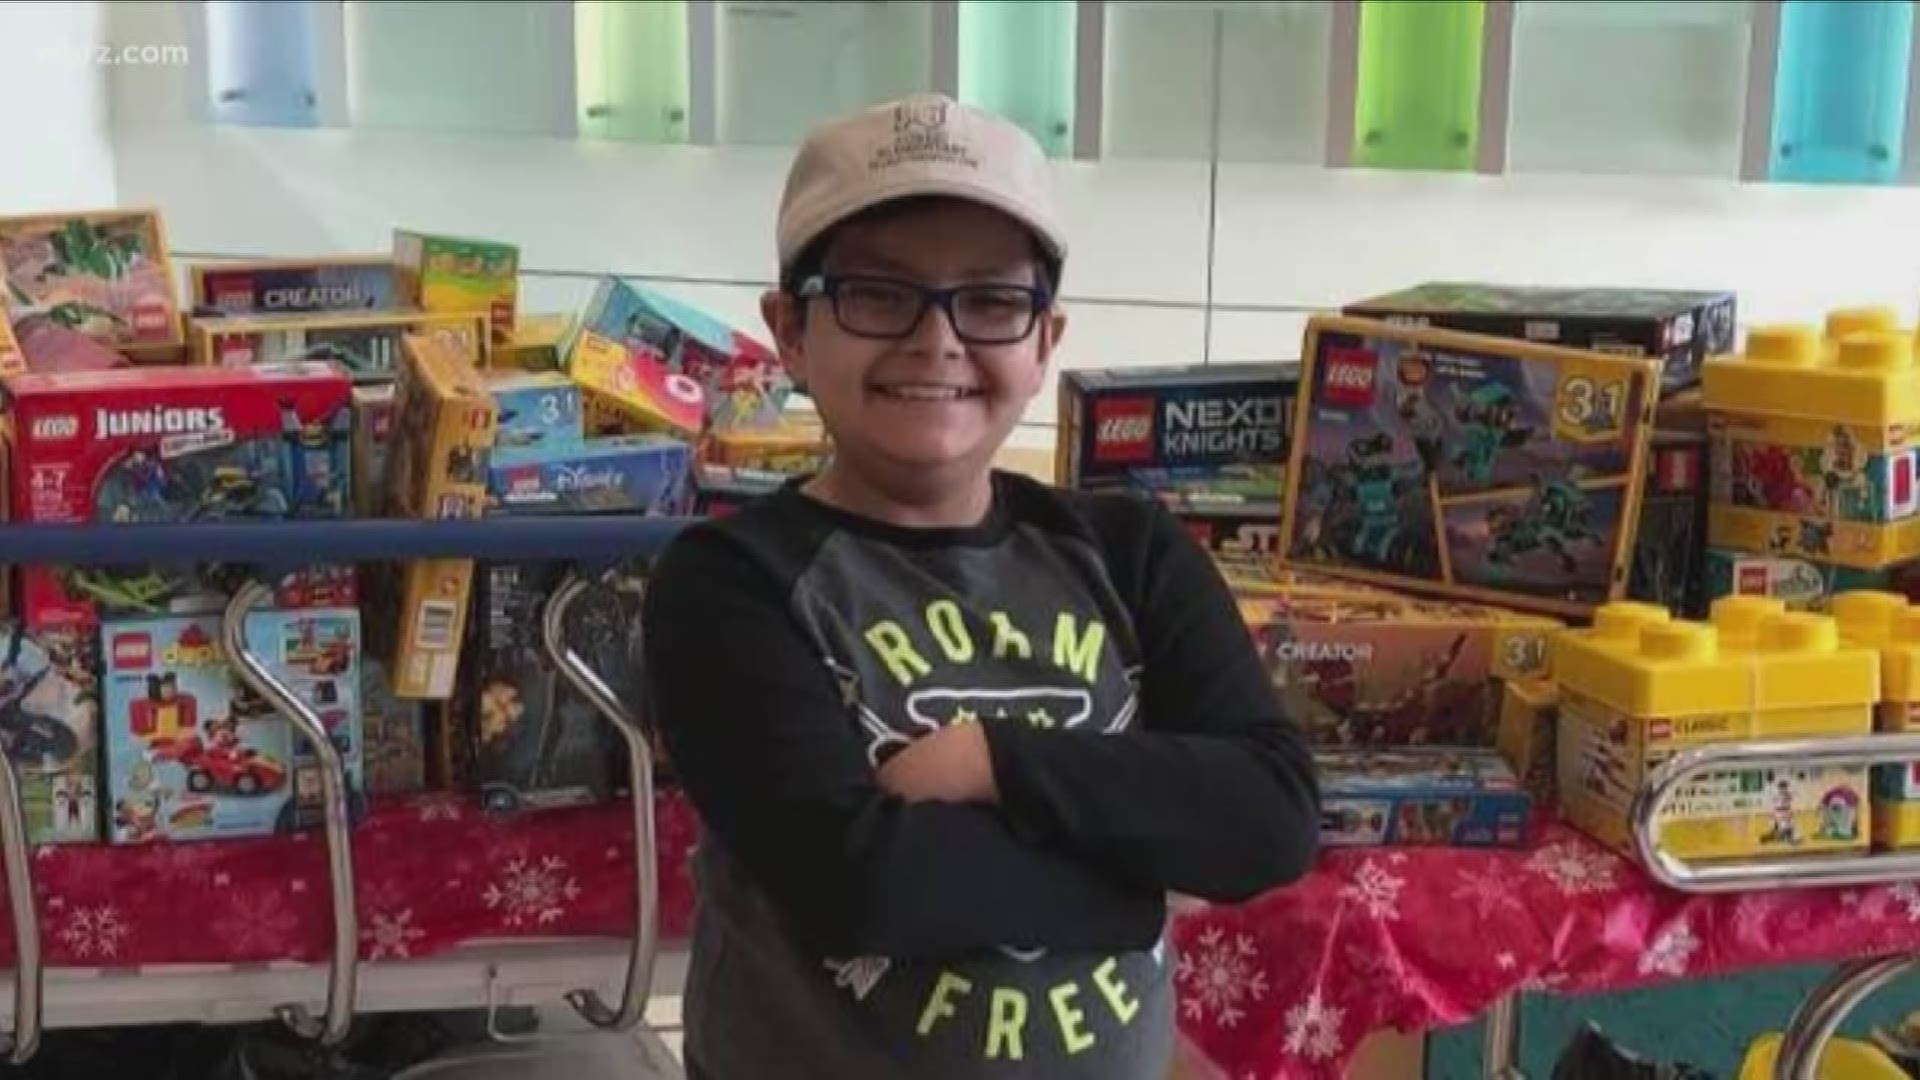 Sebastian Bradley was a 10-year-old boy who collected hundreds of Lego sets for sick kids while he fought cancer